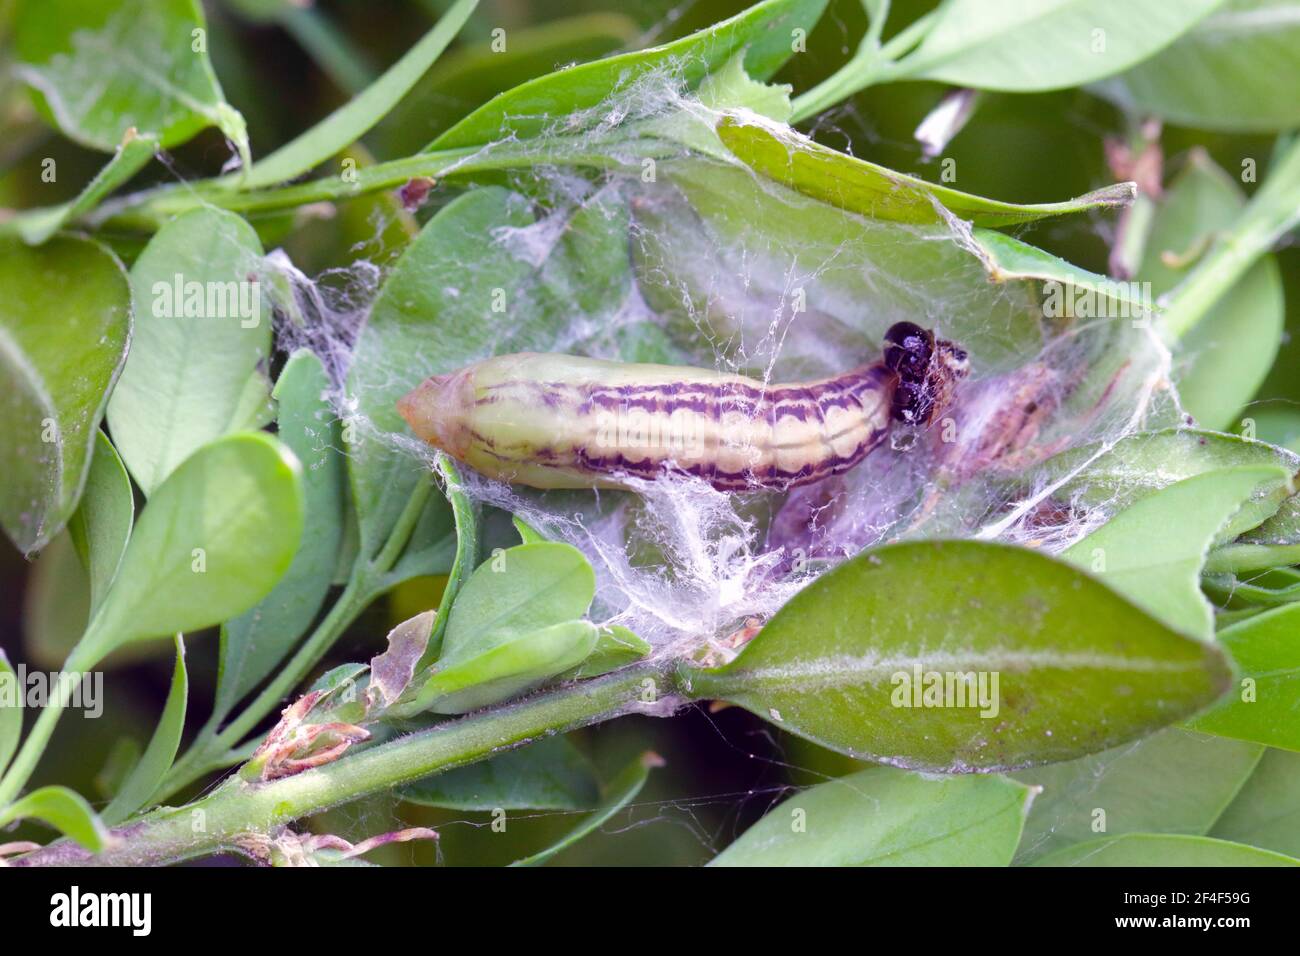 Pupa of the box tree moth (Cydalima perspectalis) in nature. It is an invasive species of insect. Pest in the gardens. Stock Photo